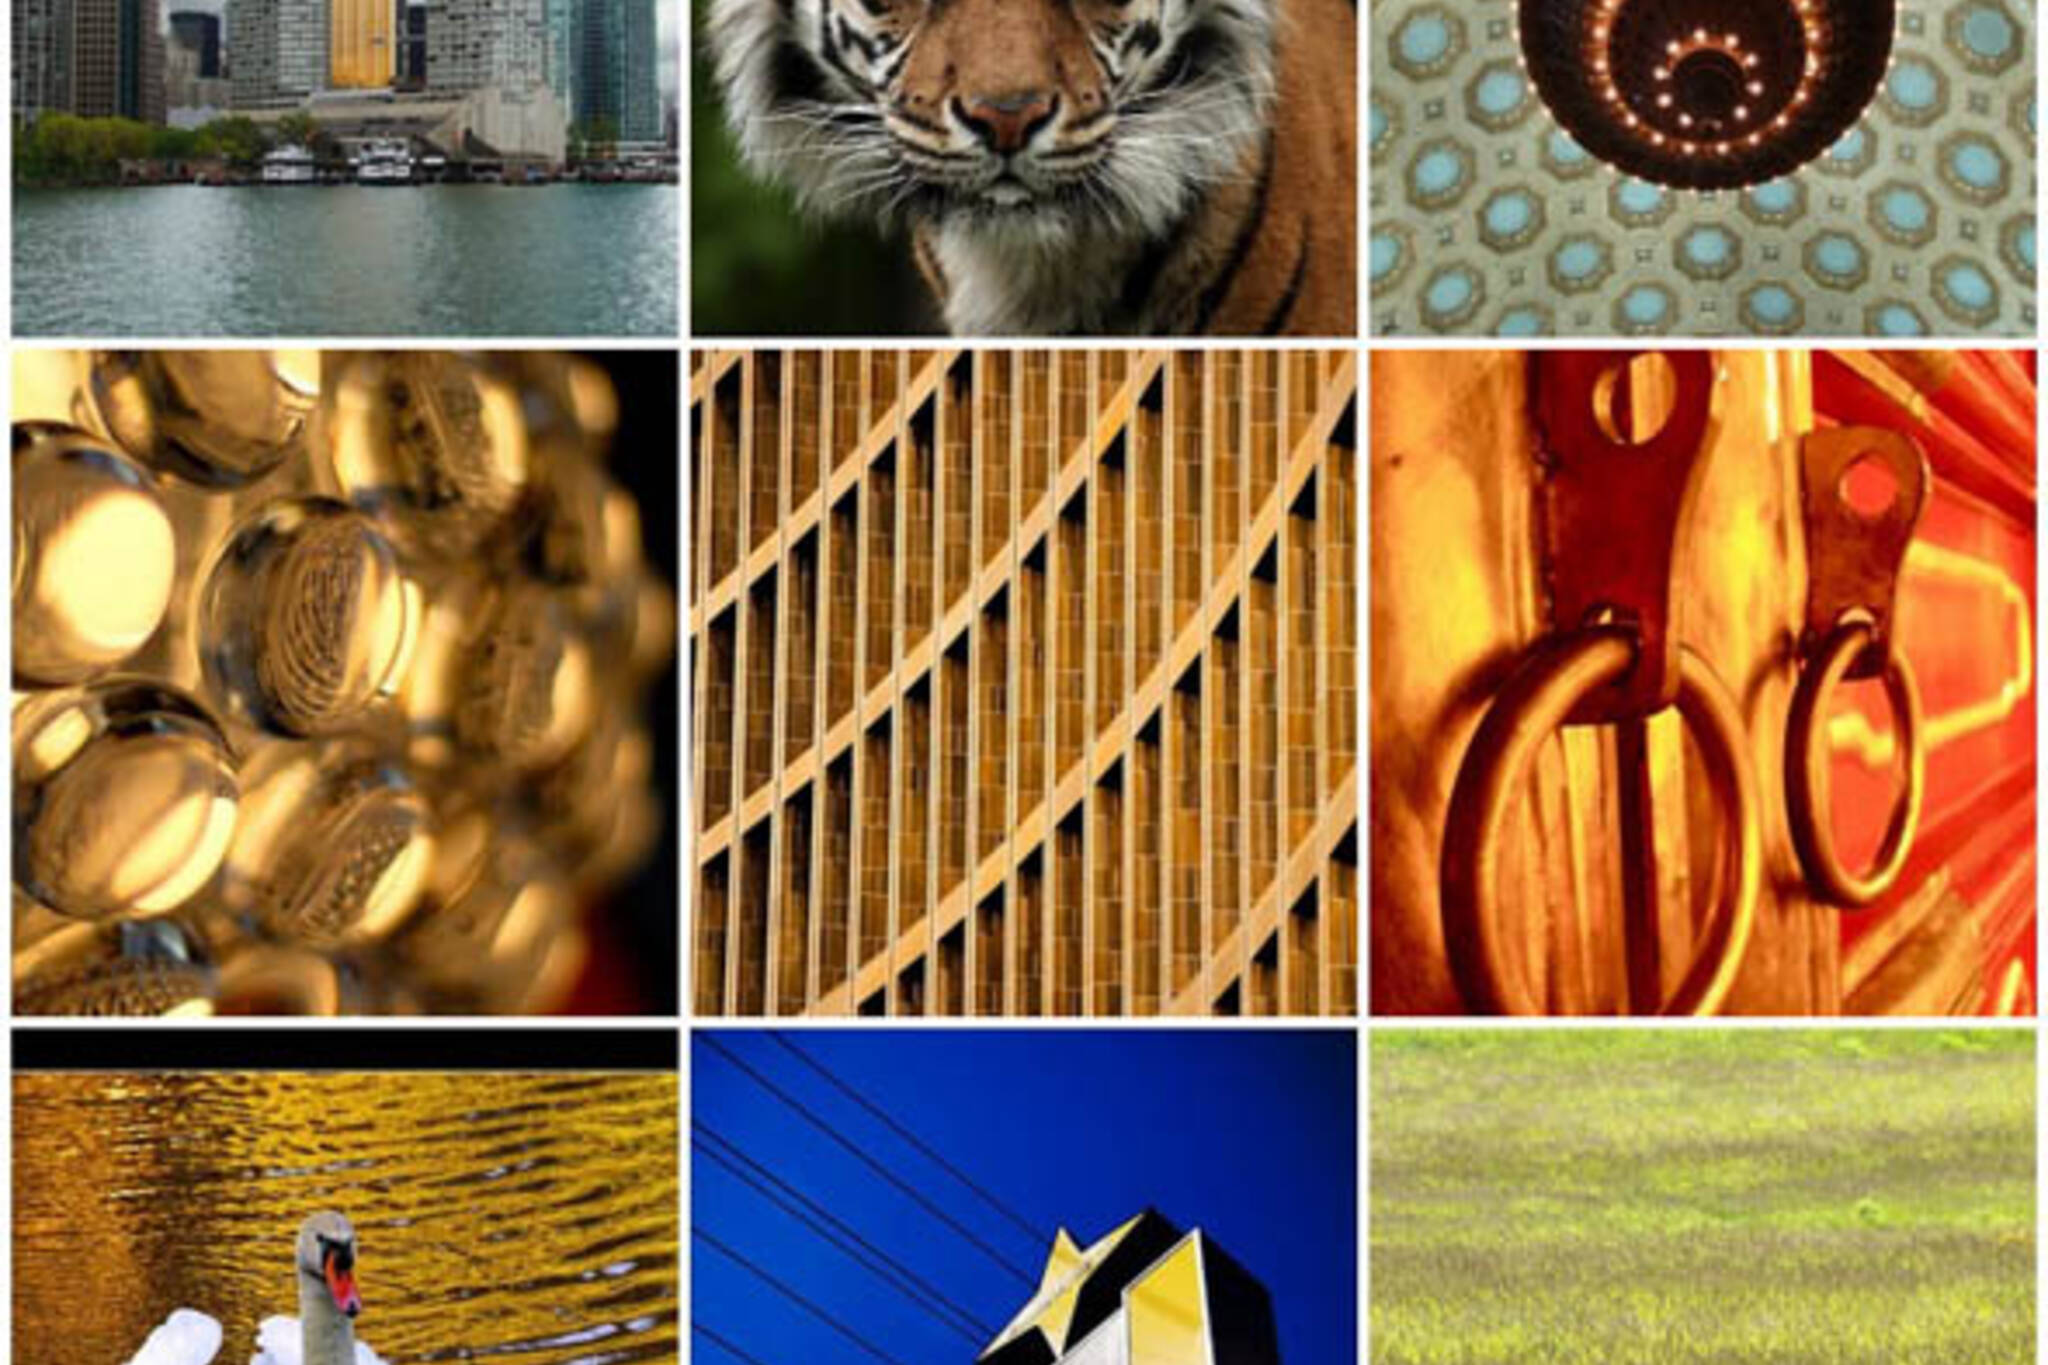 Flickr Forum: May 30th, 2008 - Gold